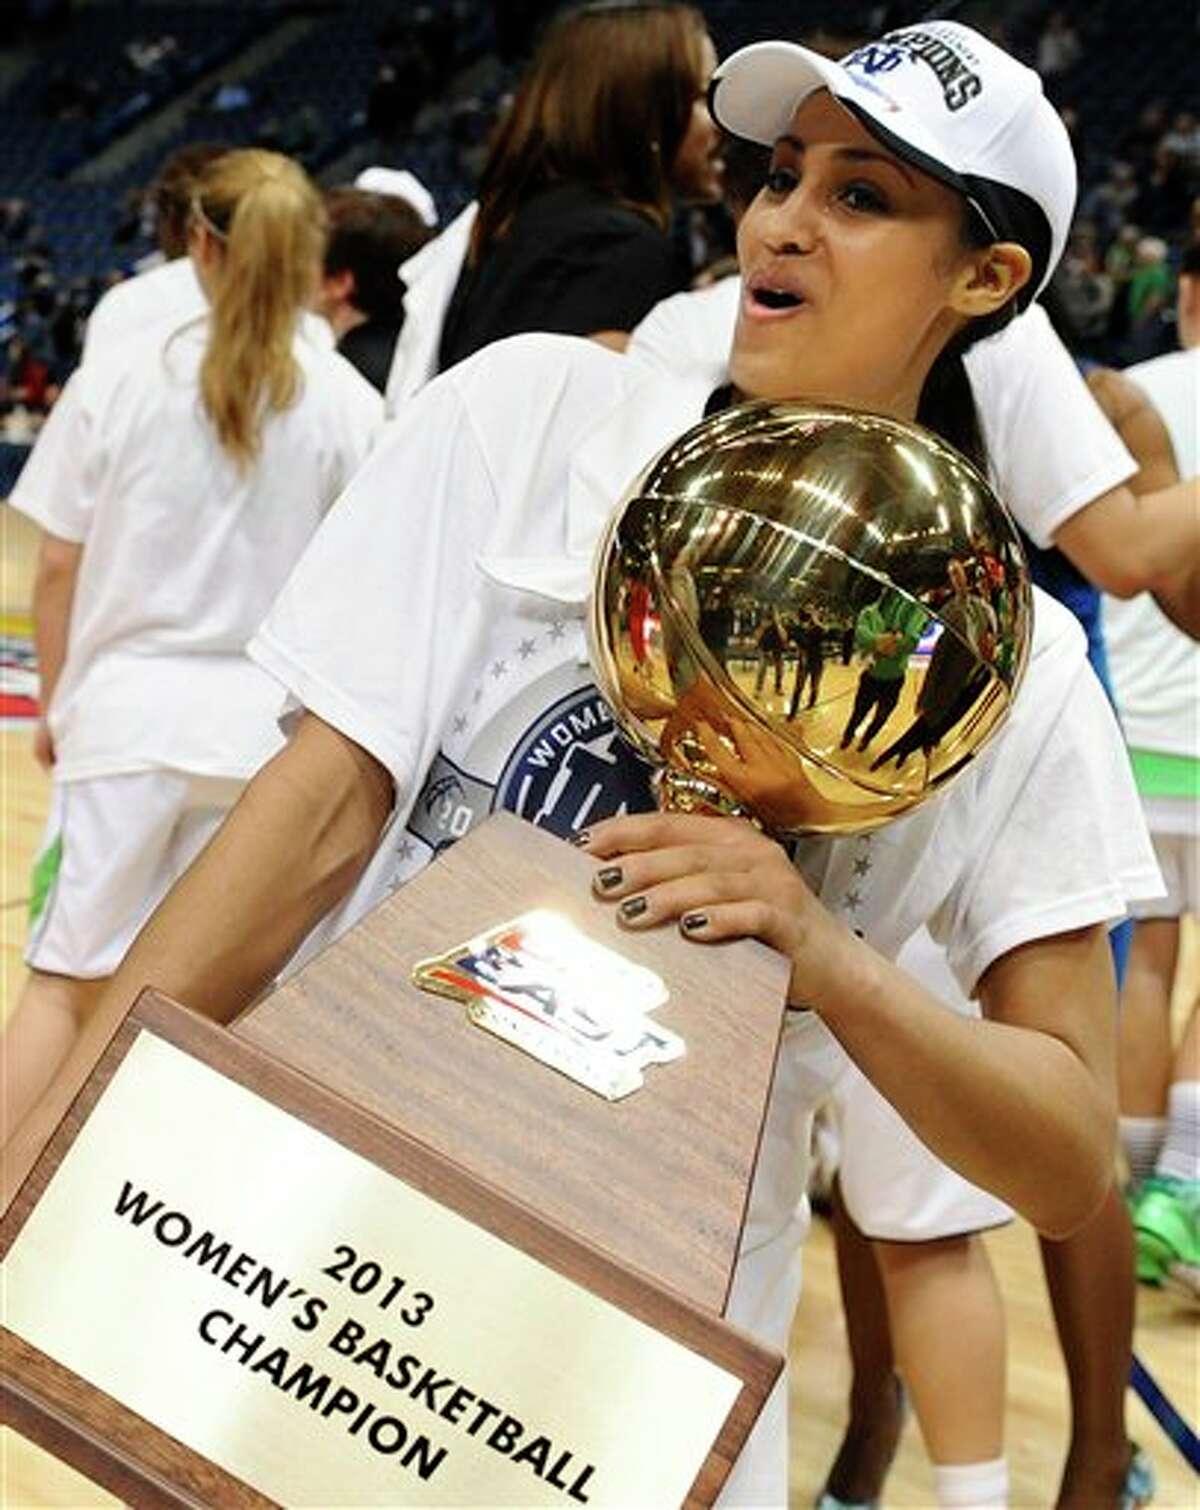 Notre Dame's Skylar Diggins holds up the Big East Conference women's tournament championship trophy after their 61-59 win over Connecticut in an NCAA college basketball game in Hartford, Conn., Tuesday, March 12, 2013. (AP Photo/Jessica Hill)